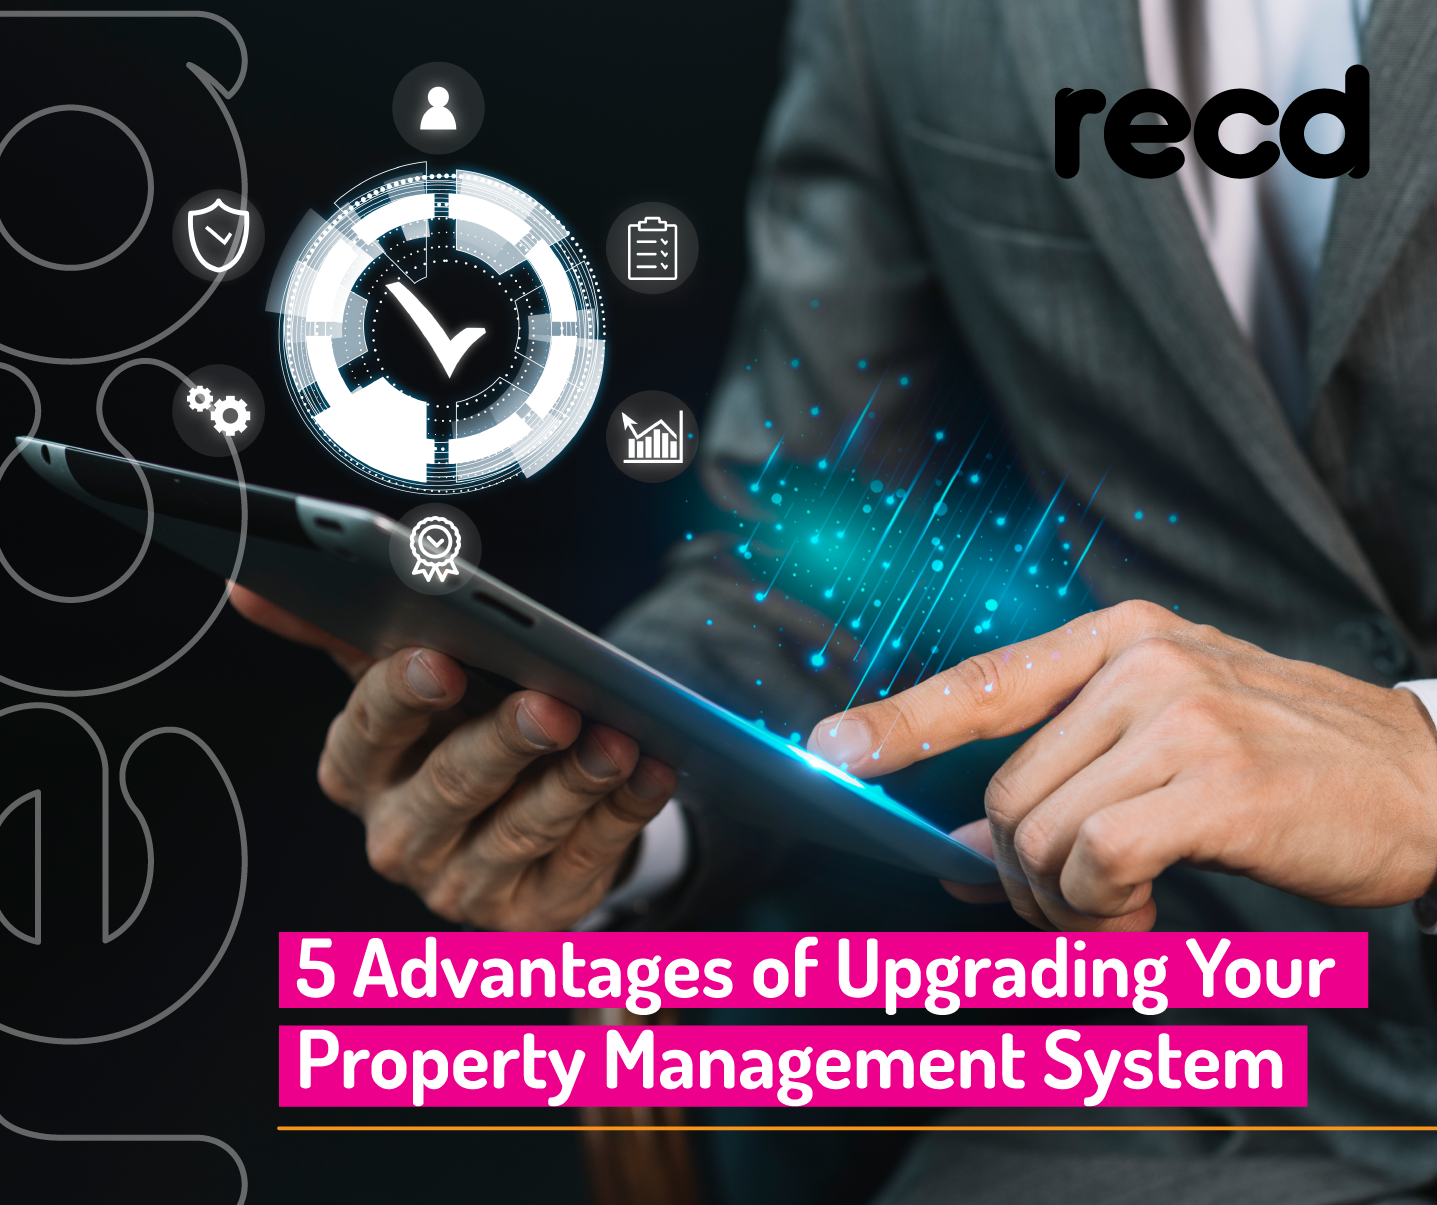 Advantages of Upgrading Your Property Management System